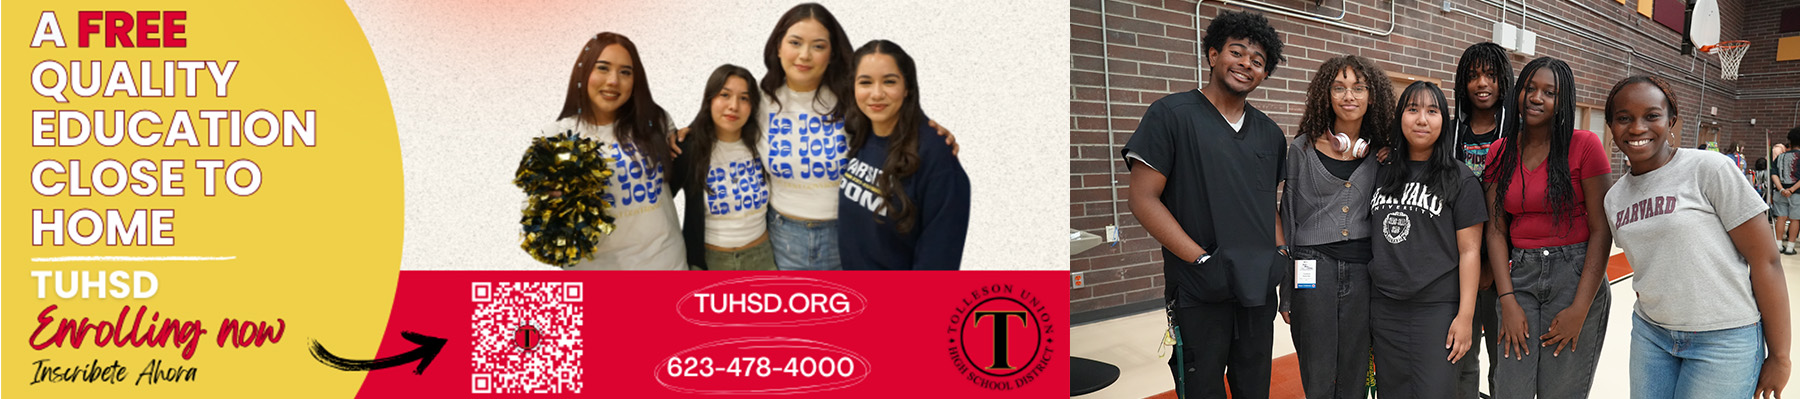 A free quality education close to home - TUHSD Enrolling now | Inscribete Ahora - tuhsd.org - 623-478-4000 | Group of happy posing for a picture in the gym